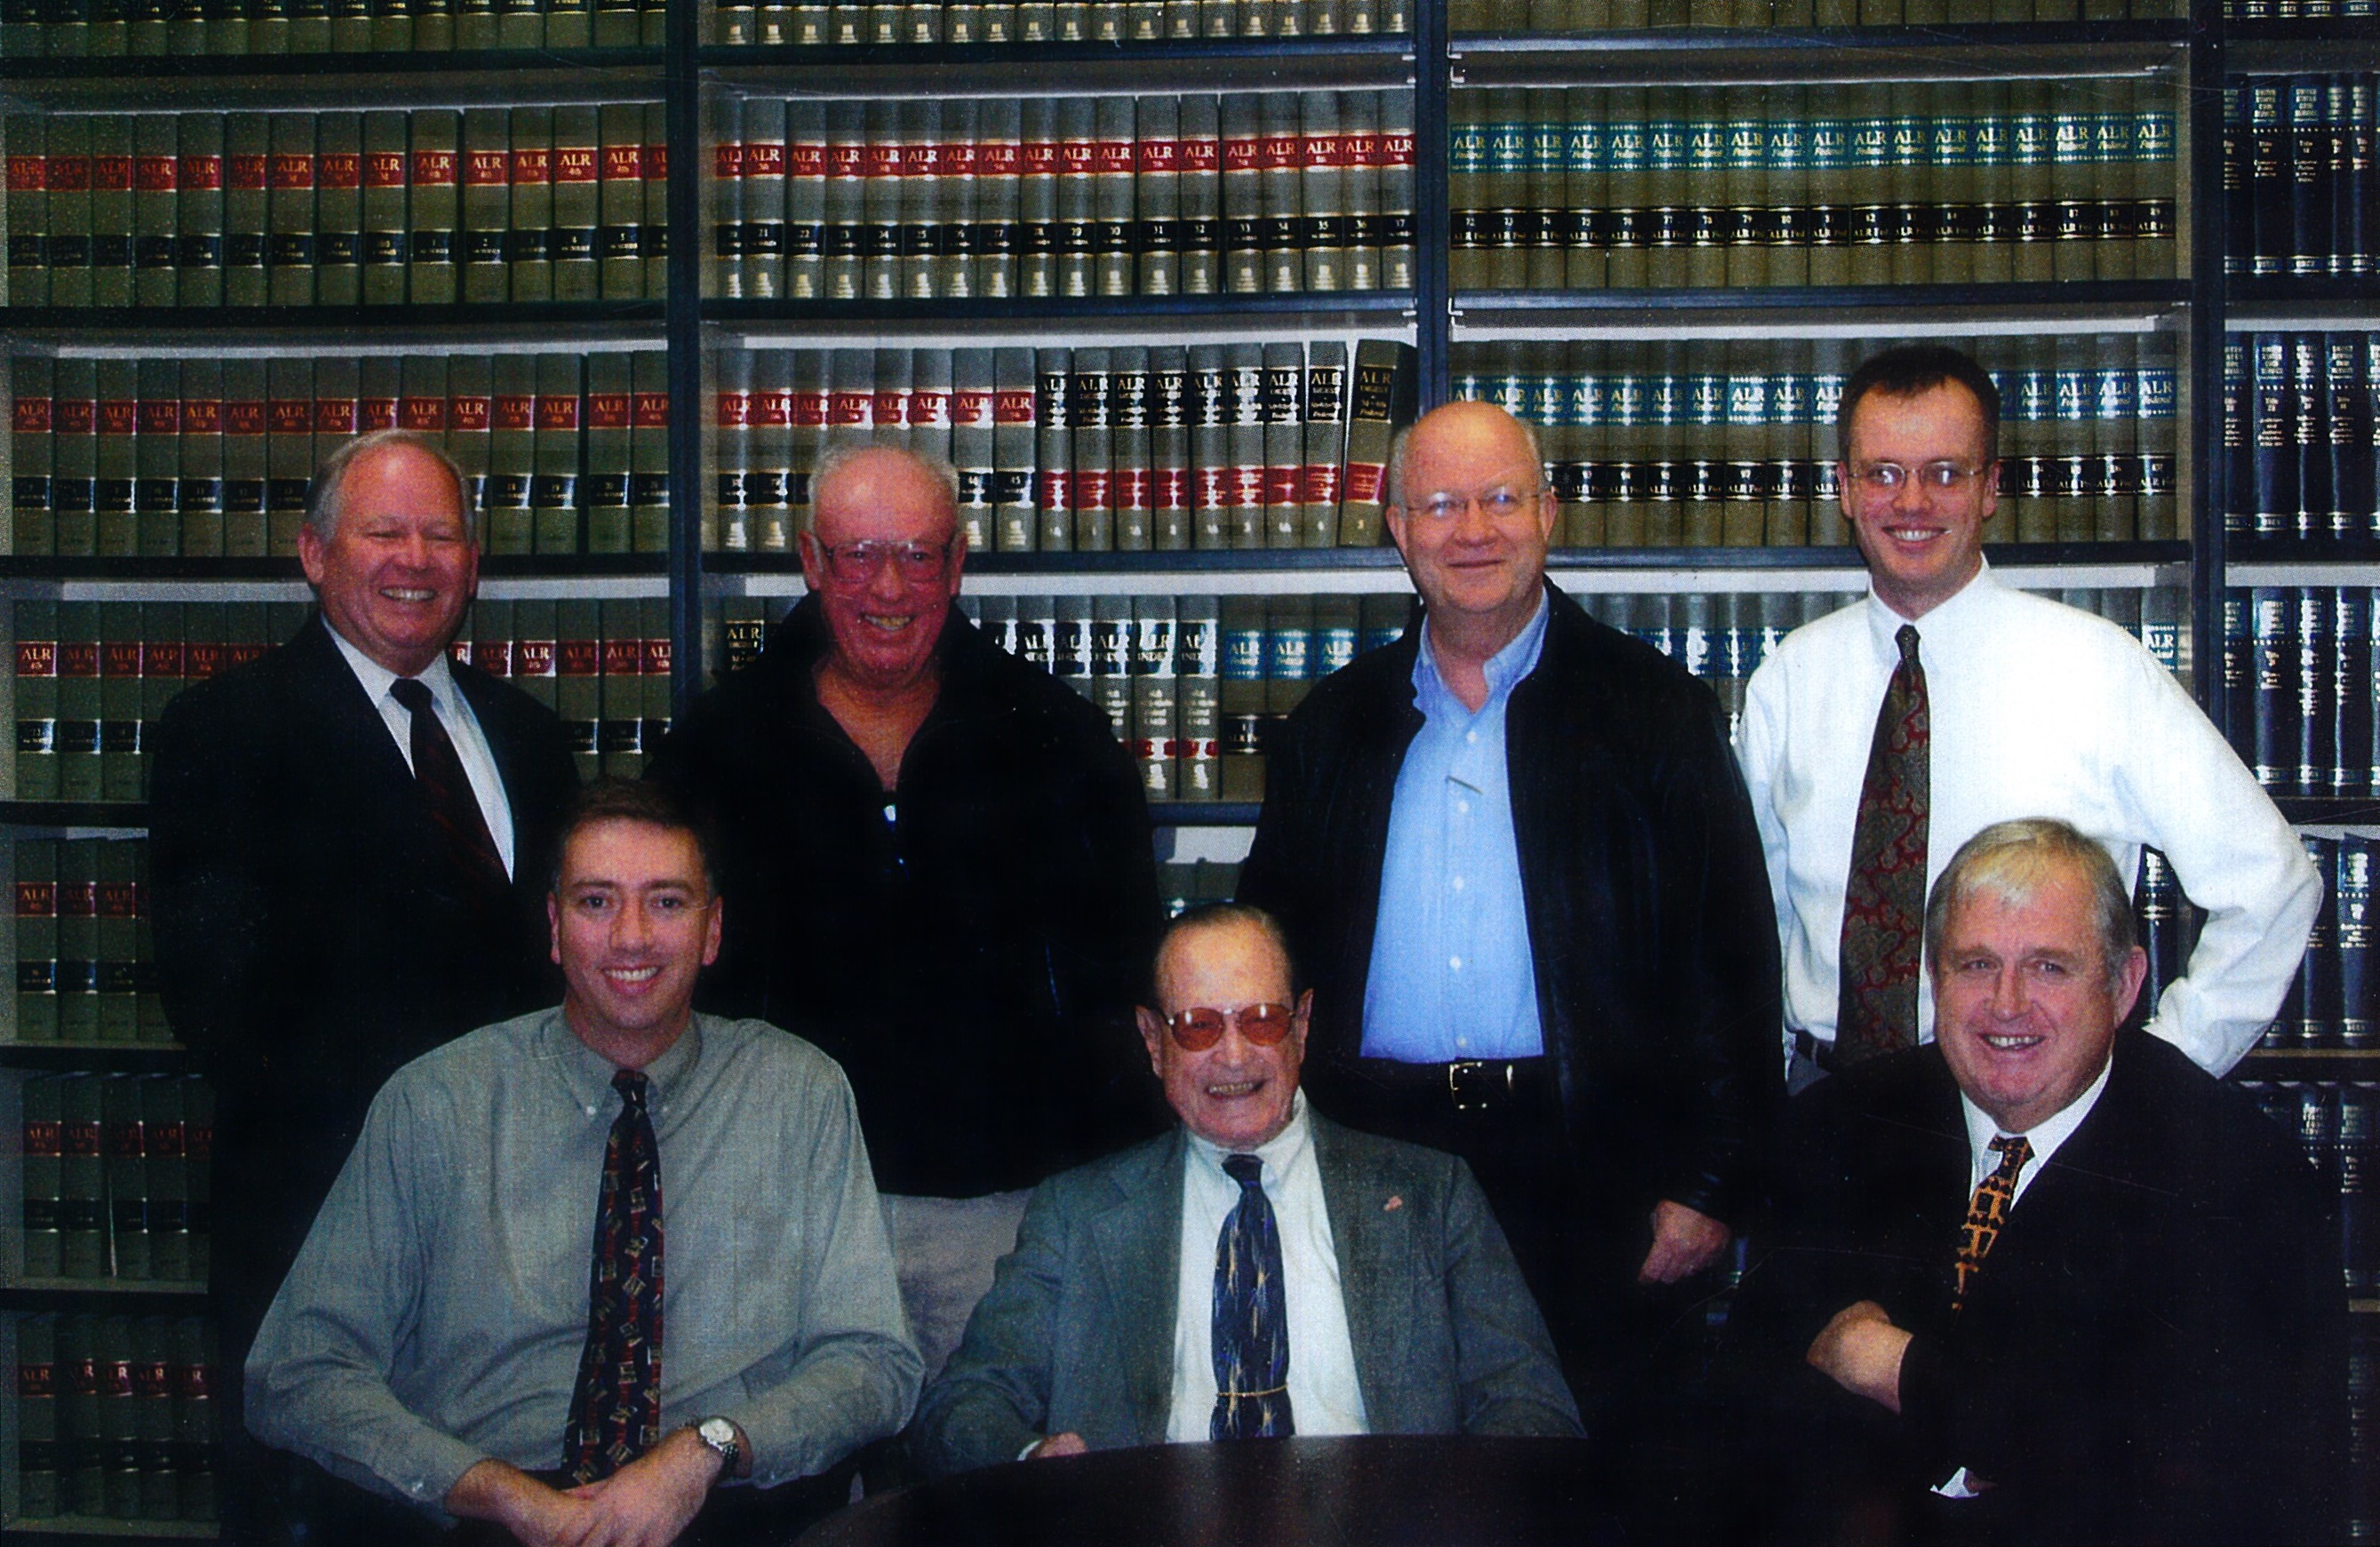 Current and all living former Washington County Attorneys in 2004